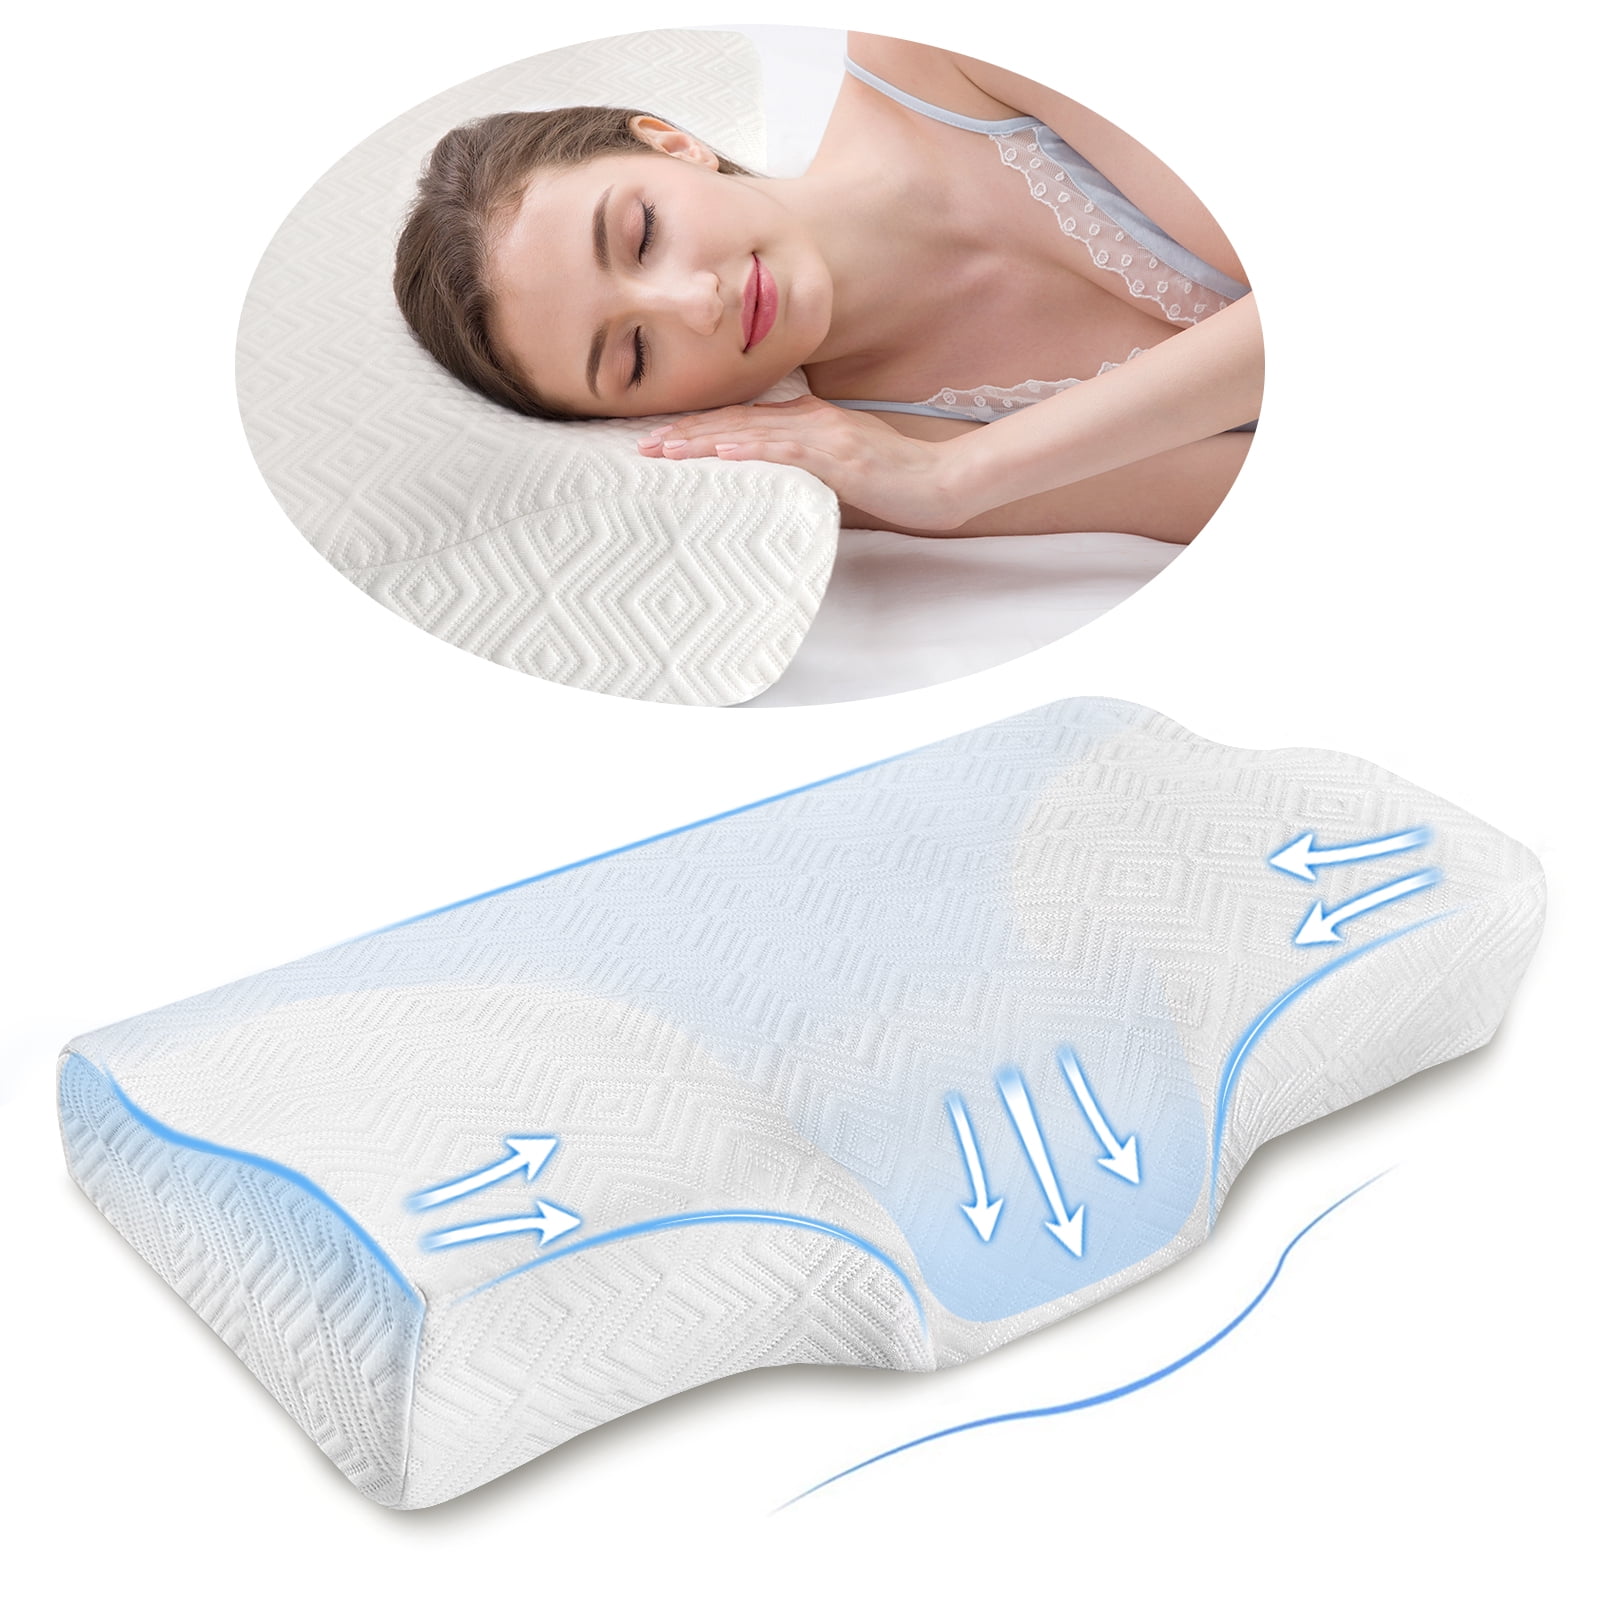 Unisex Memory Foam Pillow Butterfly Shaped Health Care Relax Slow Rebound Pillow 